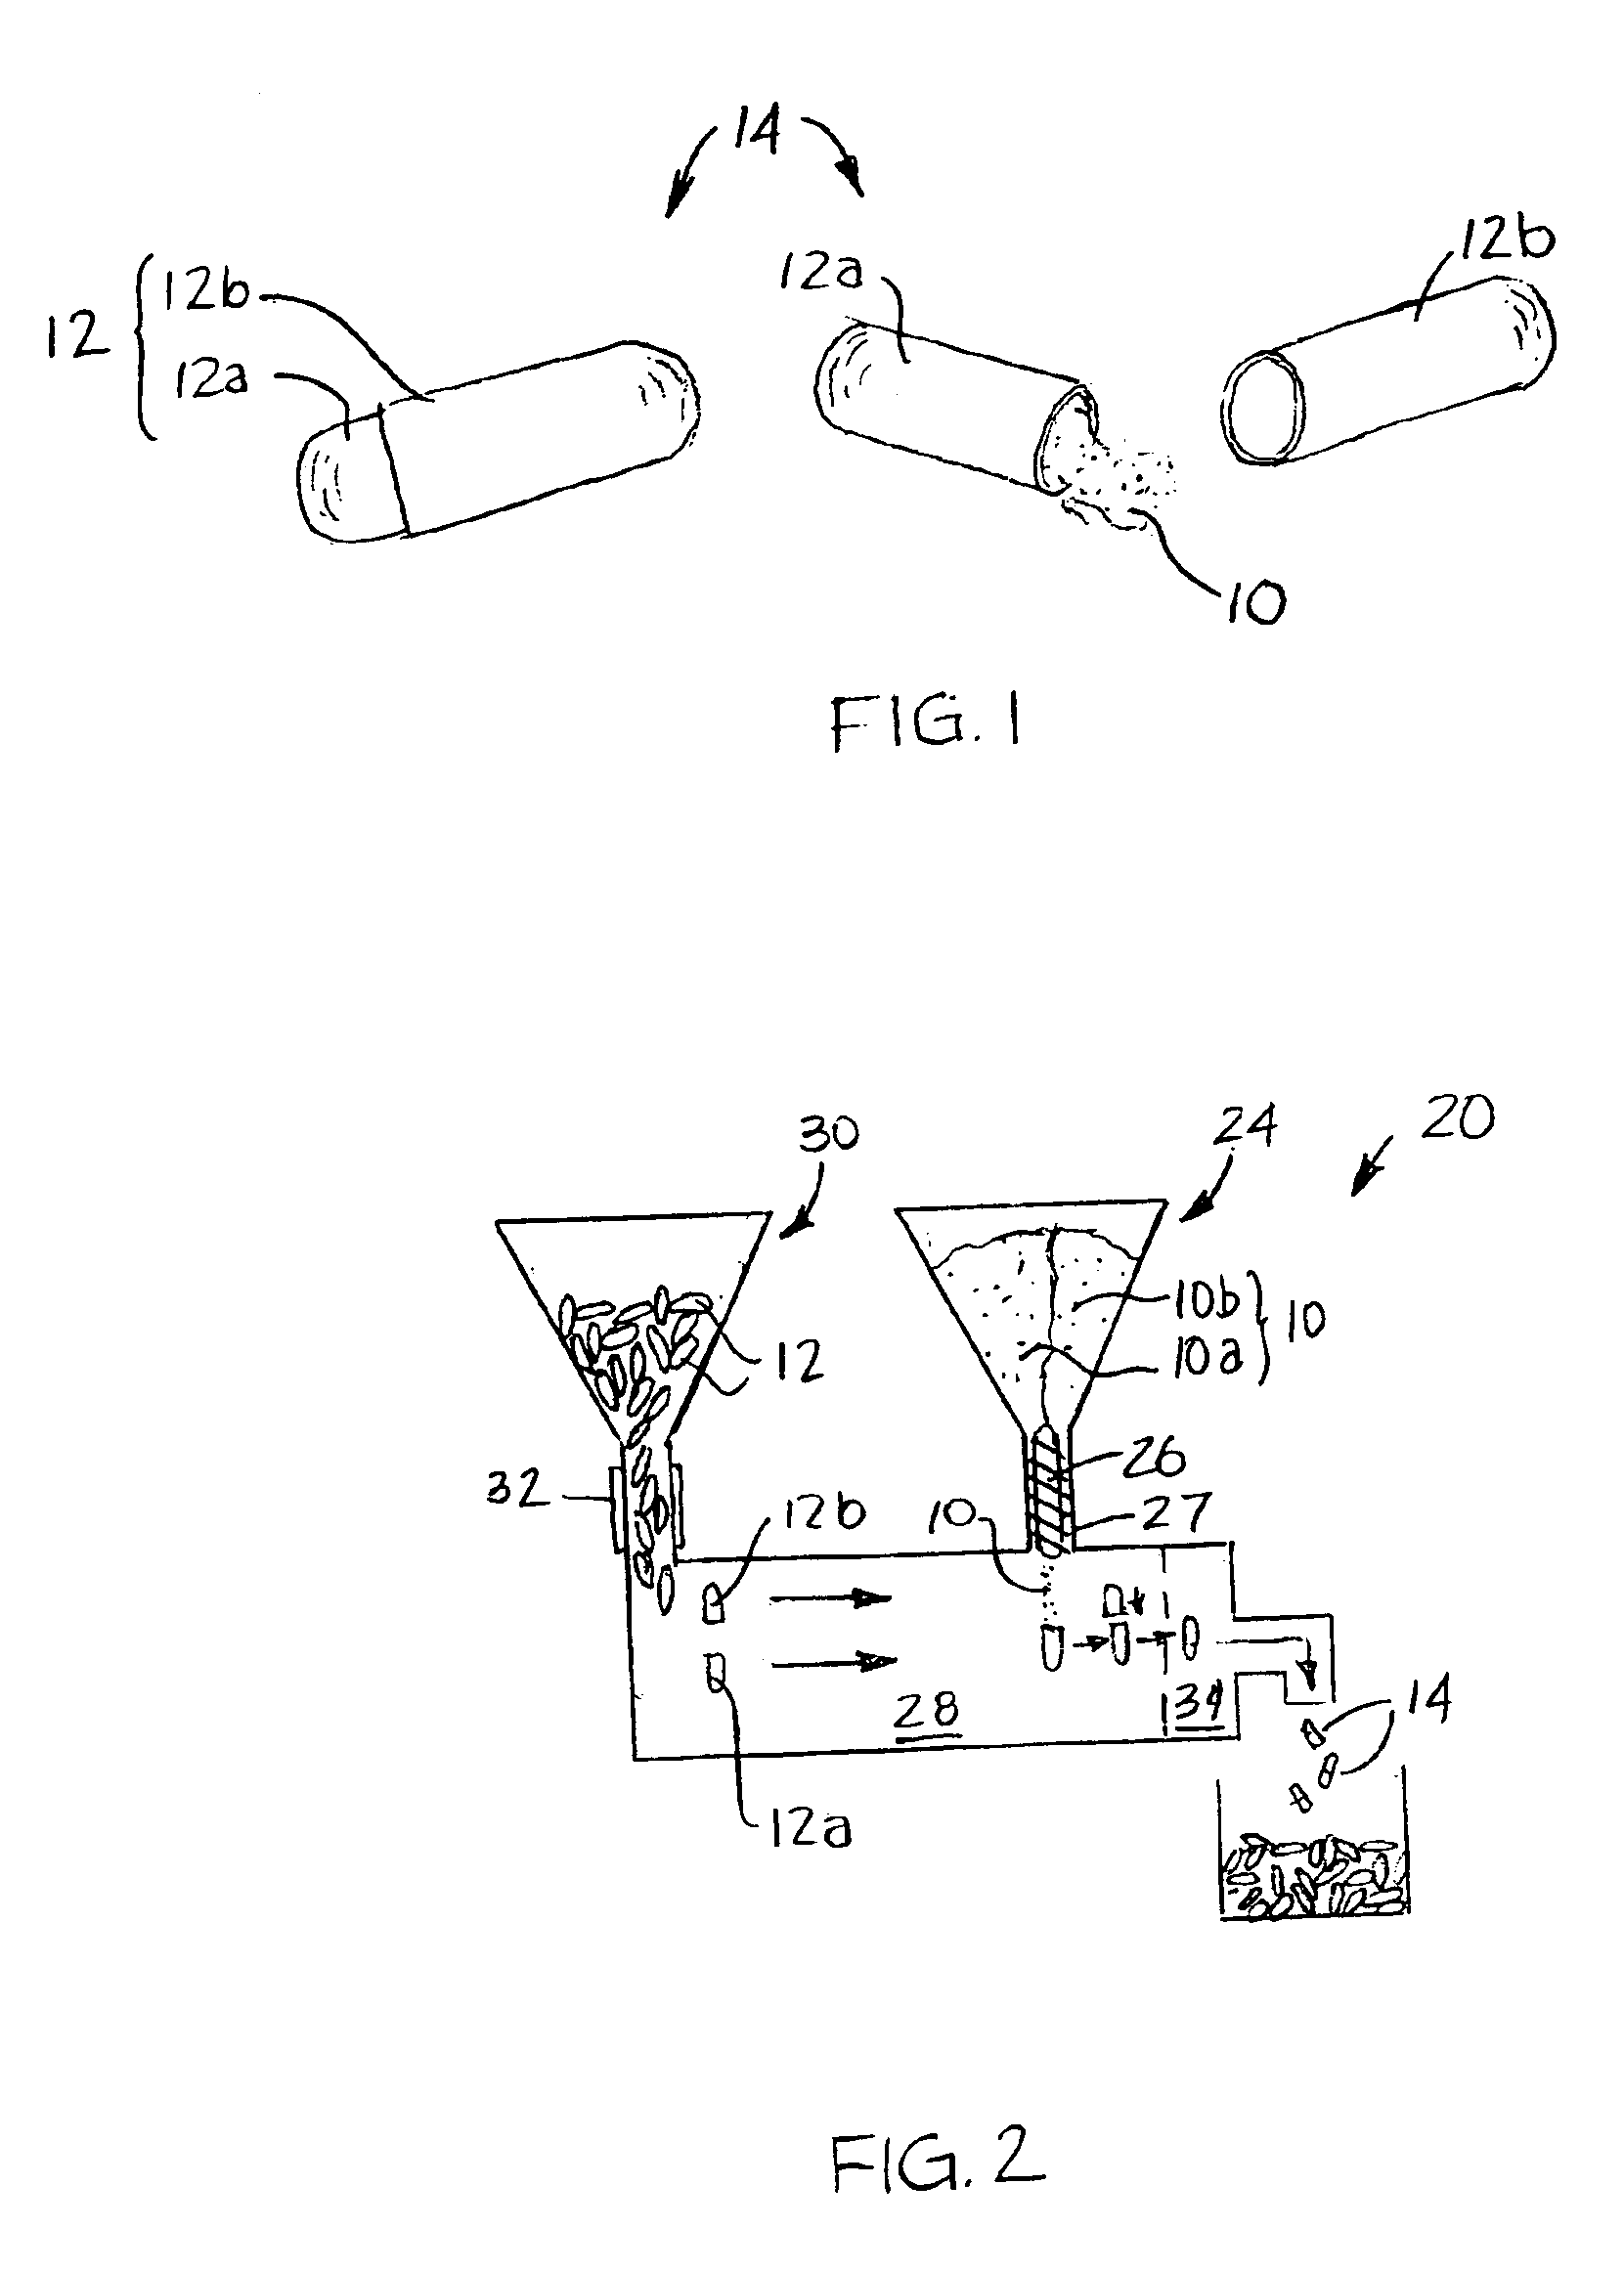 Compositions including different types of transfer factor, methods for making the compositions, and methods of treatment using the compositions